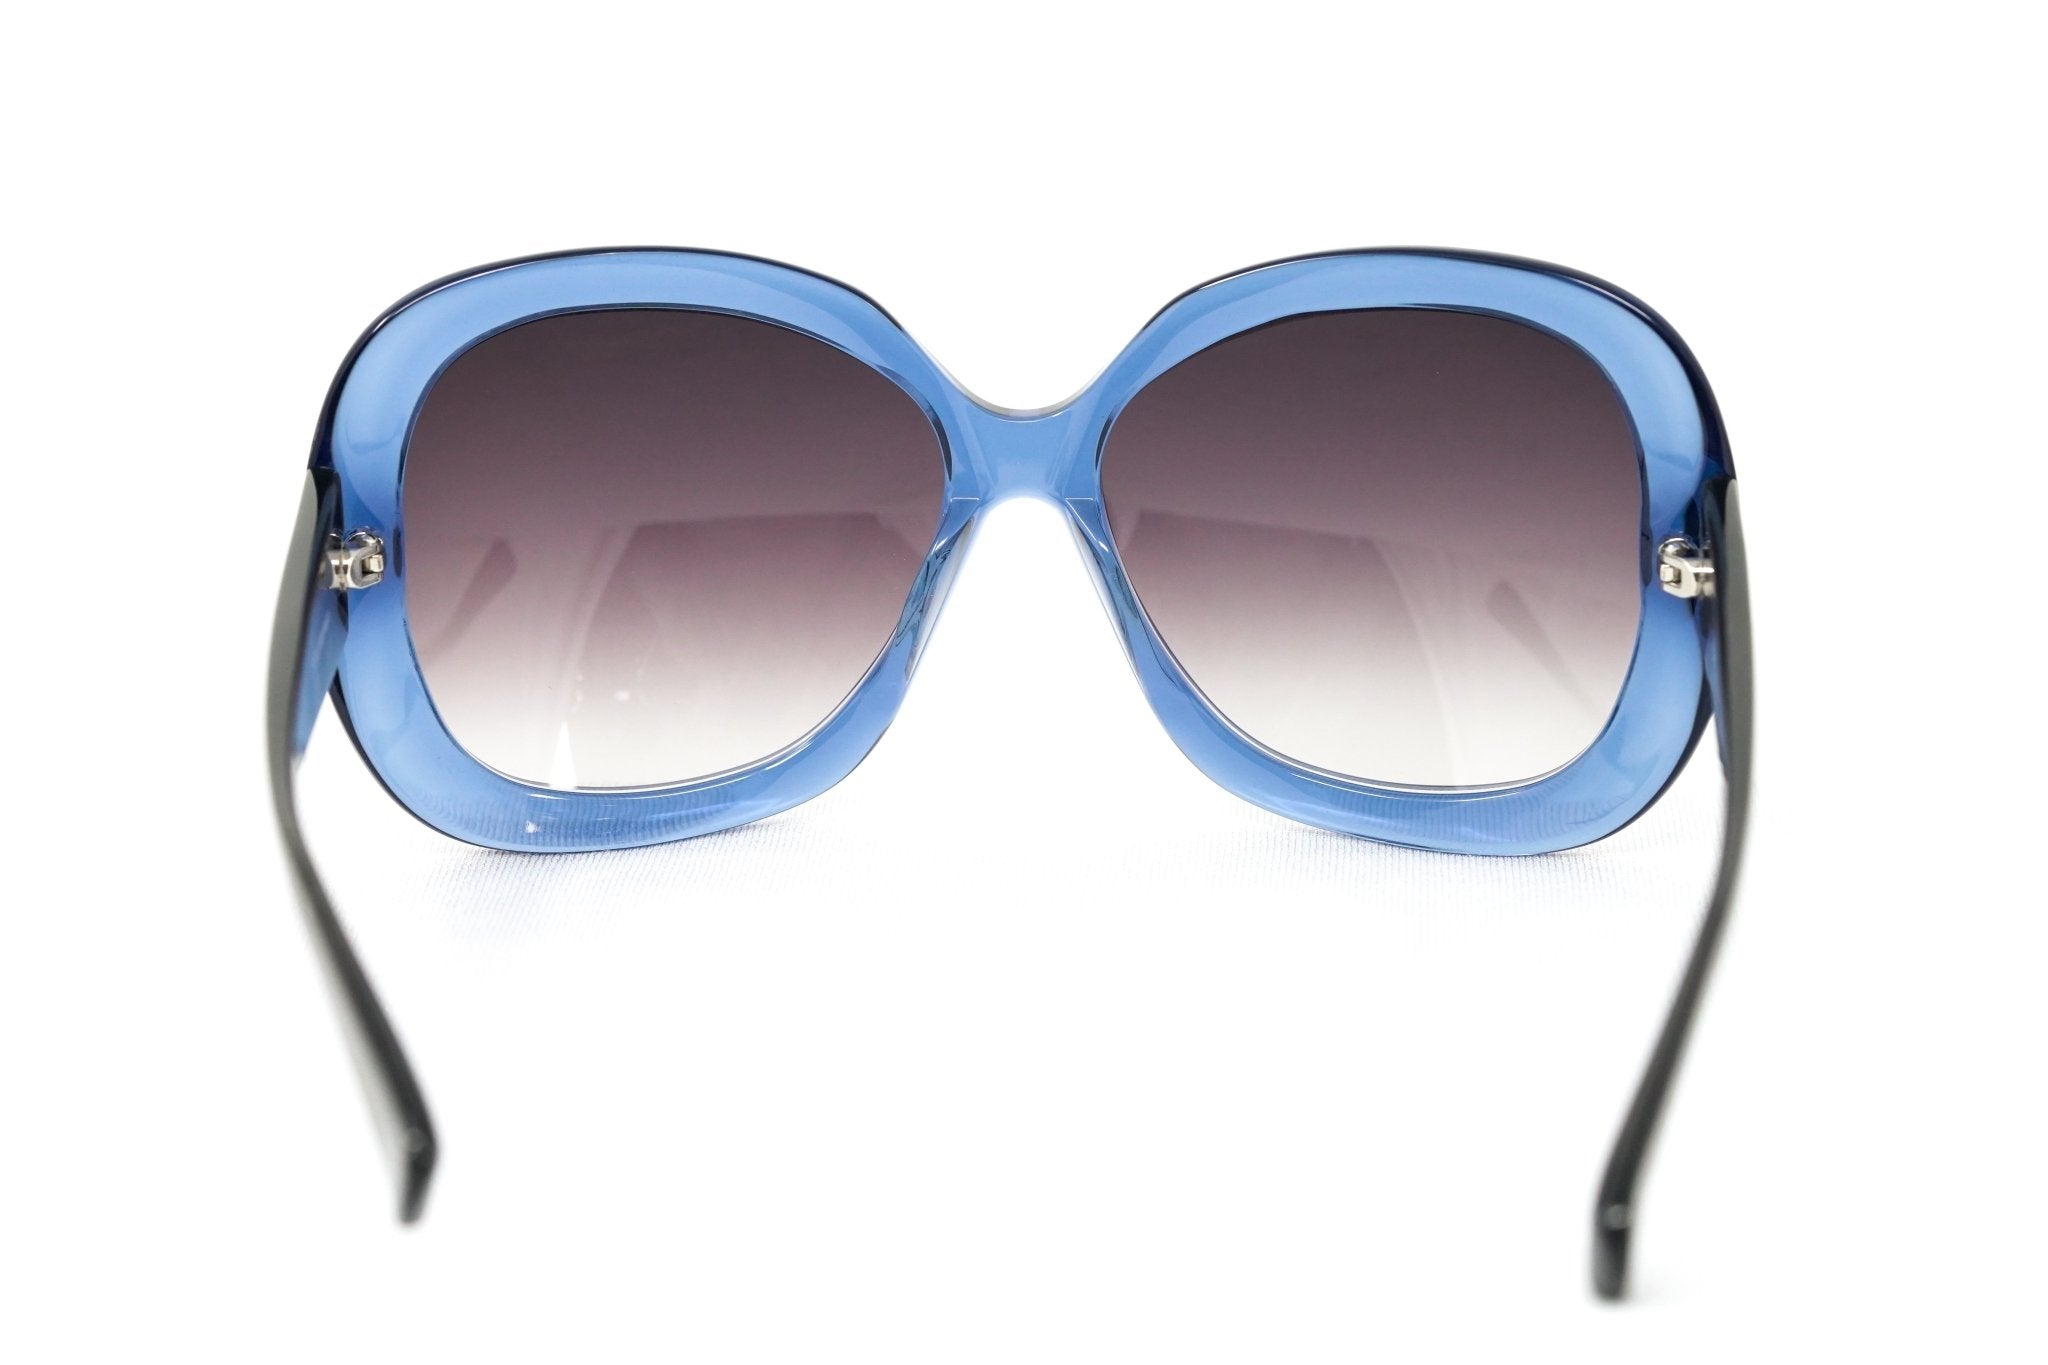 Rue De Mail Sunglasses Oversized Blue and Grey - Watches & Crystals